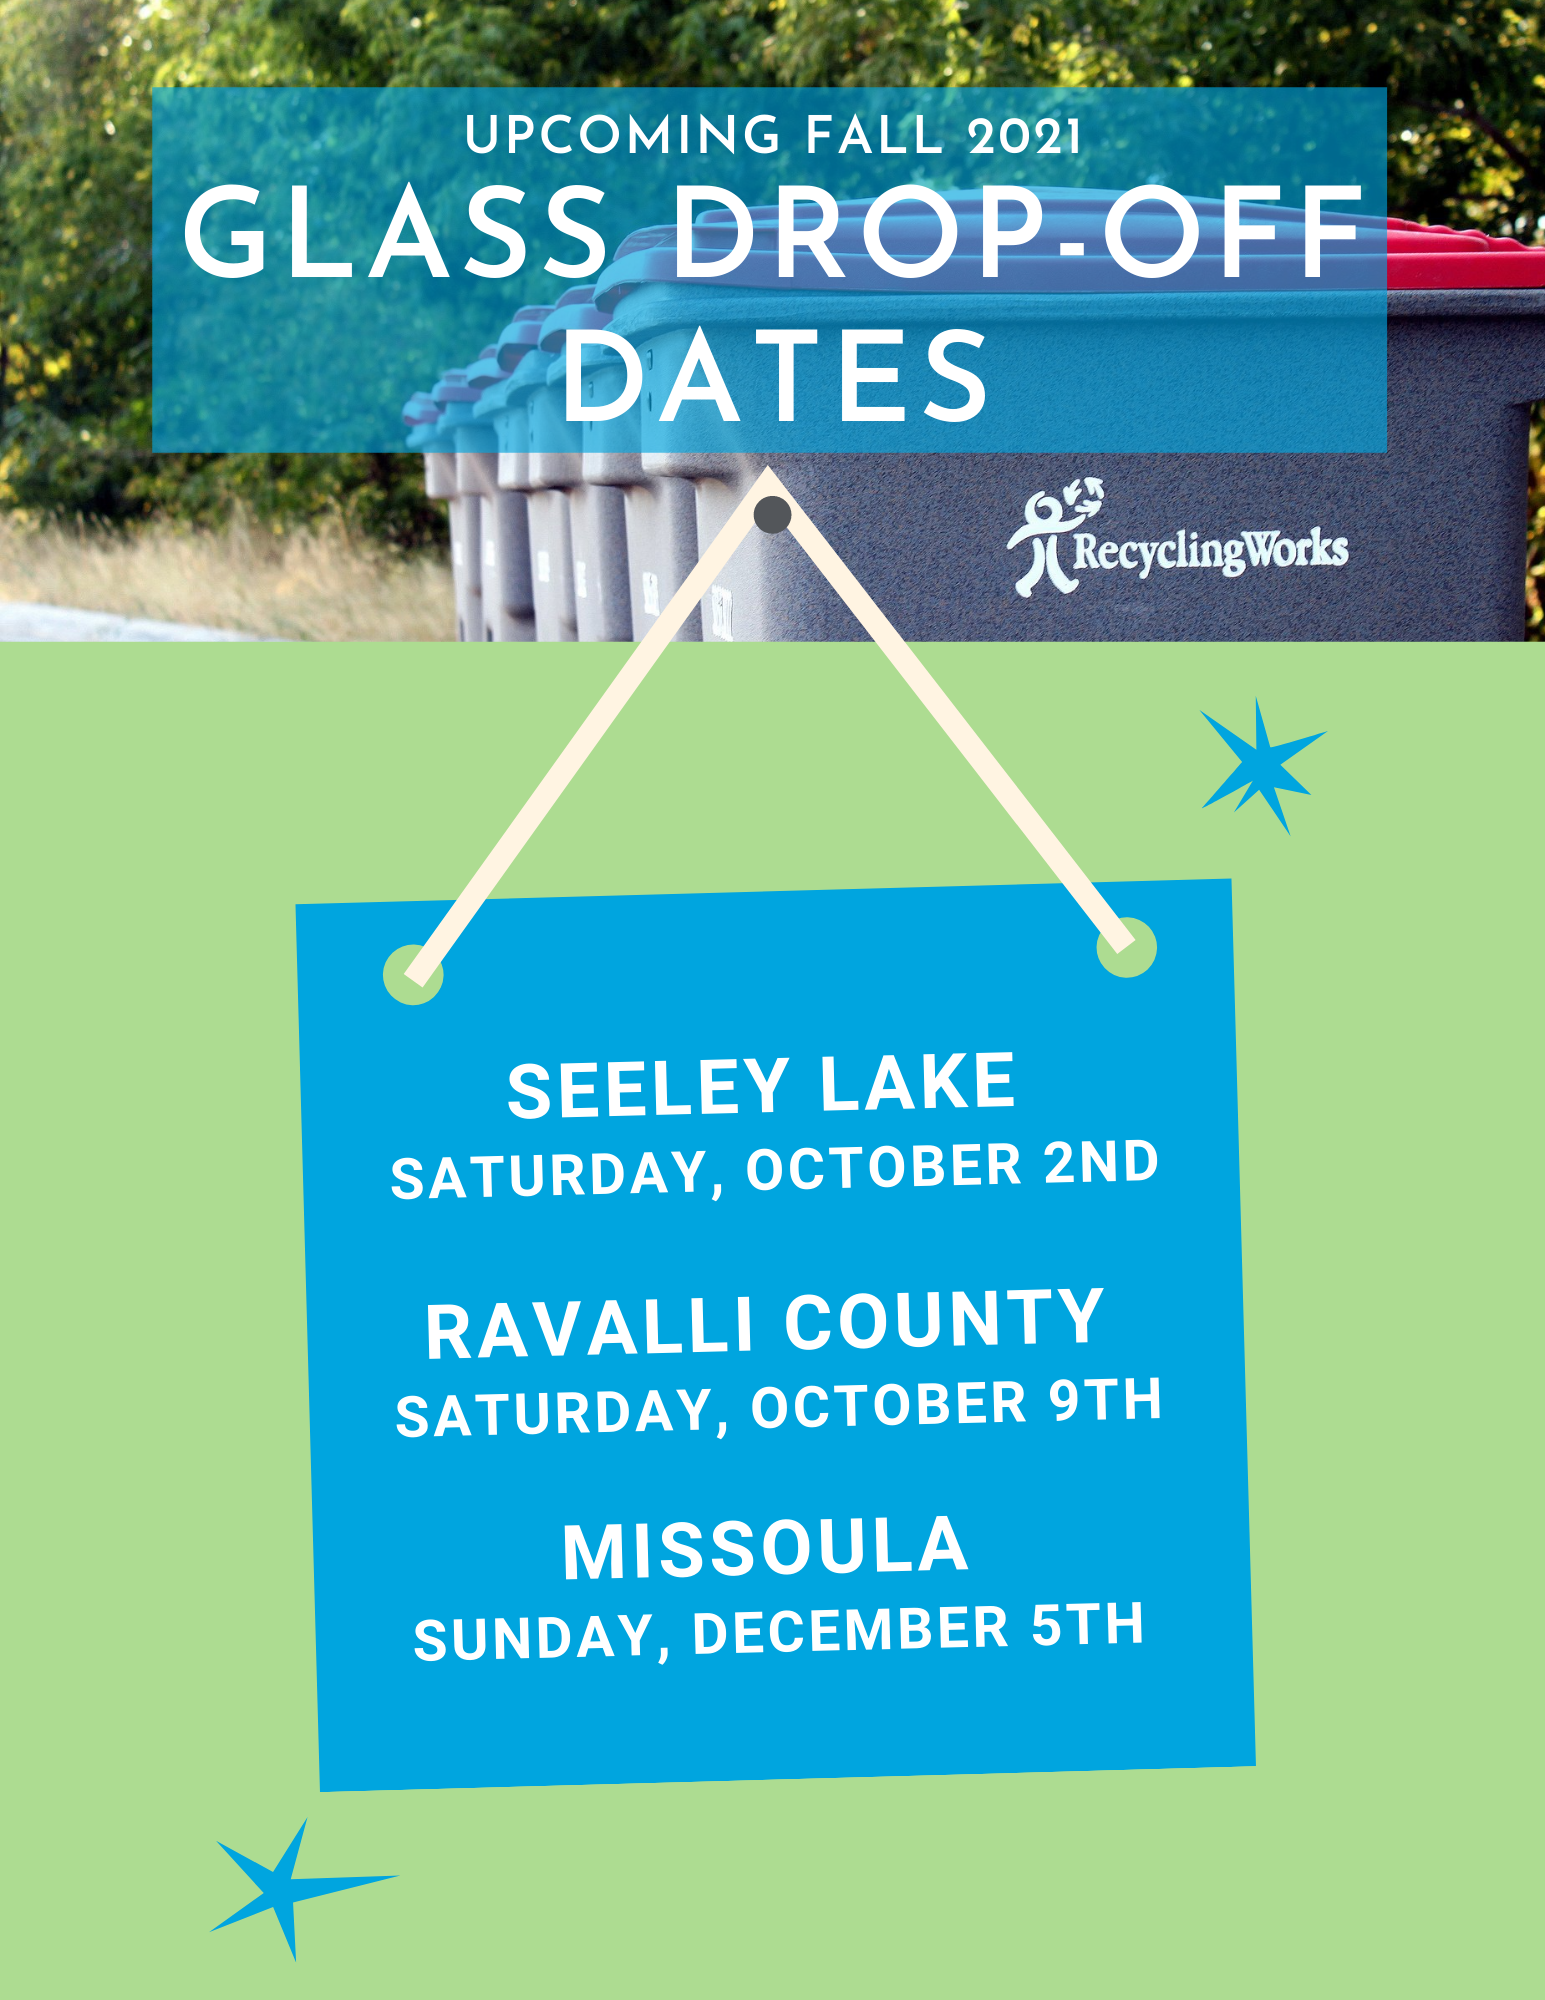 Upcoming Fall 2021 Glass Drop-off Dates